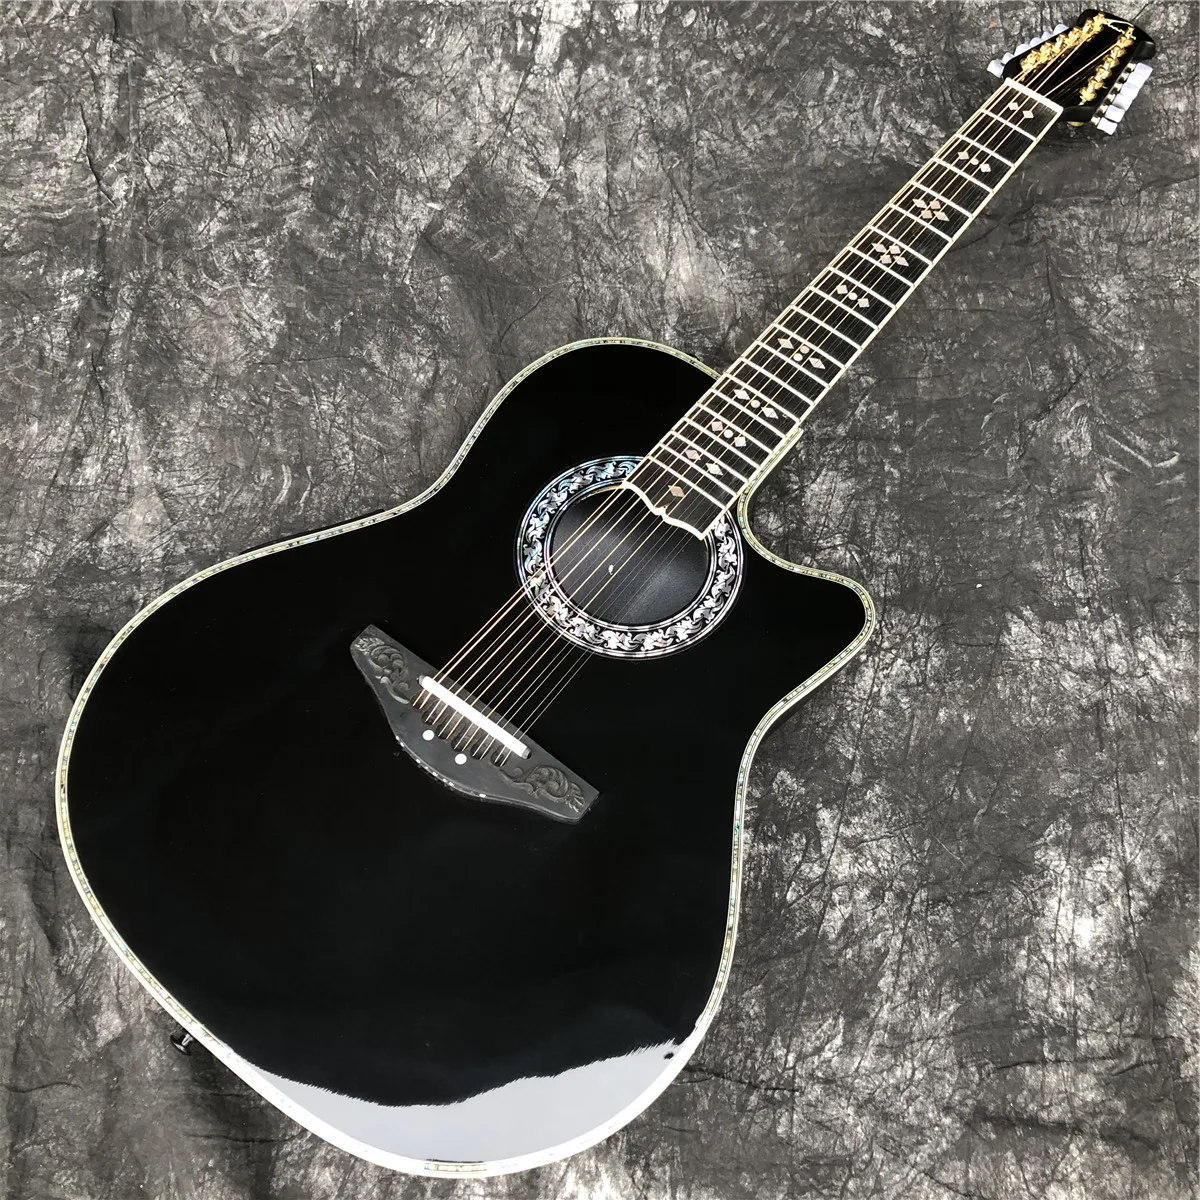 

12 Strings Black Solid Spruce Acoustic Guitar Abalone Inlays Carbon Fiber Tortoise Shell Acoustic Ovation Electric EQ Guitar